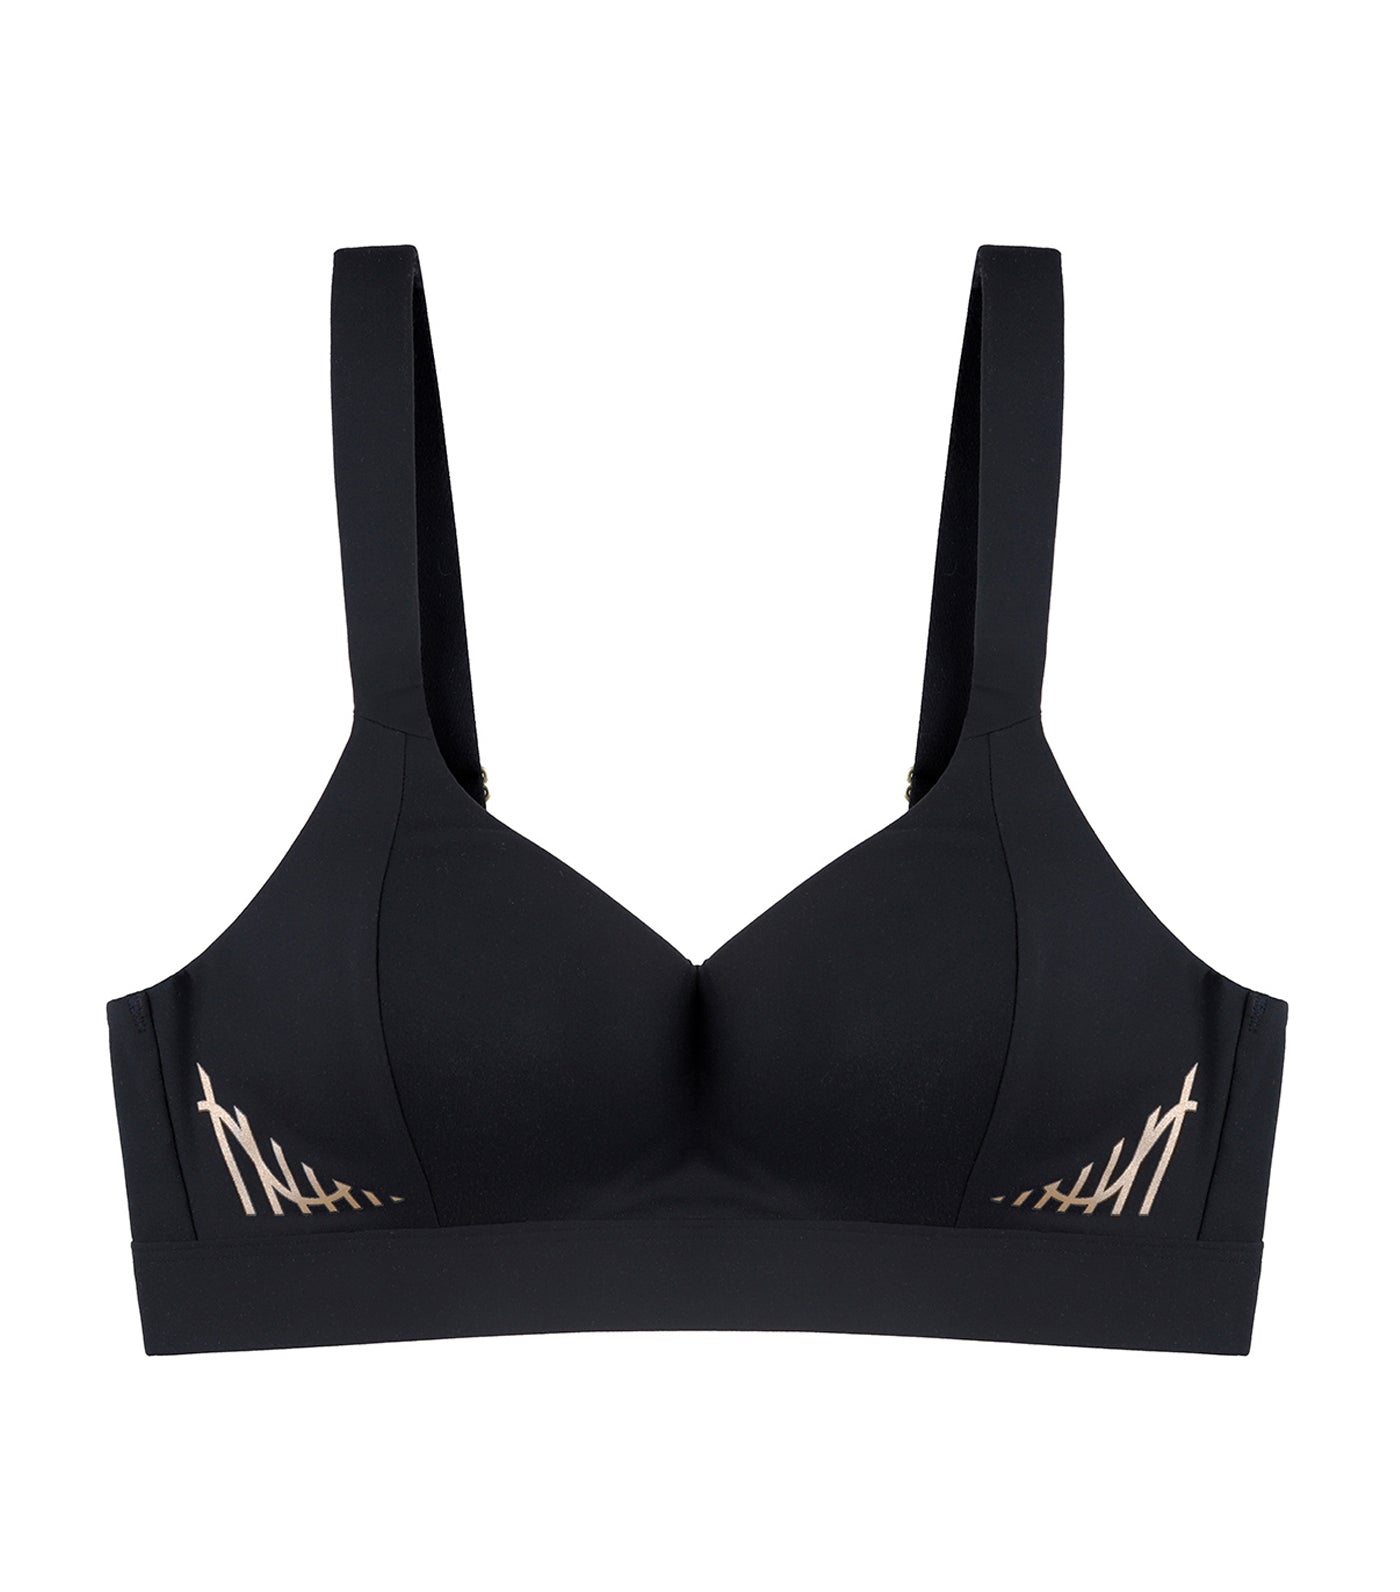 Inside-Out Non-Wired Push-Up Bra Black